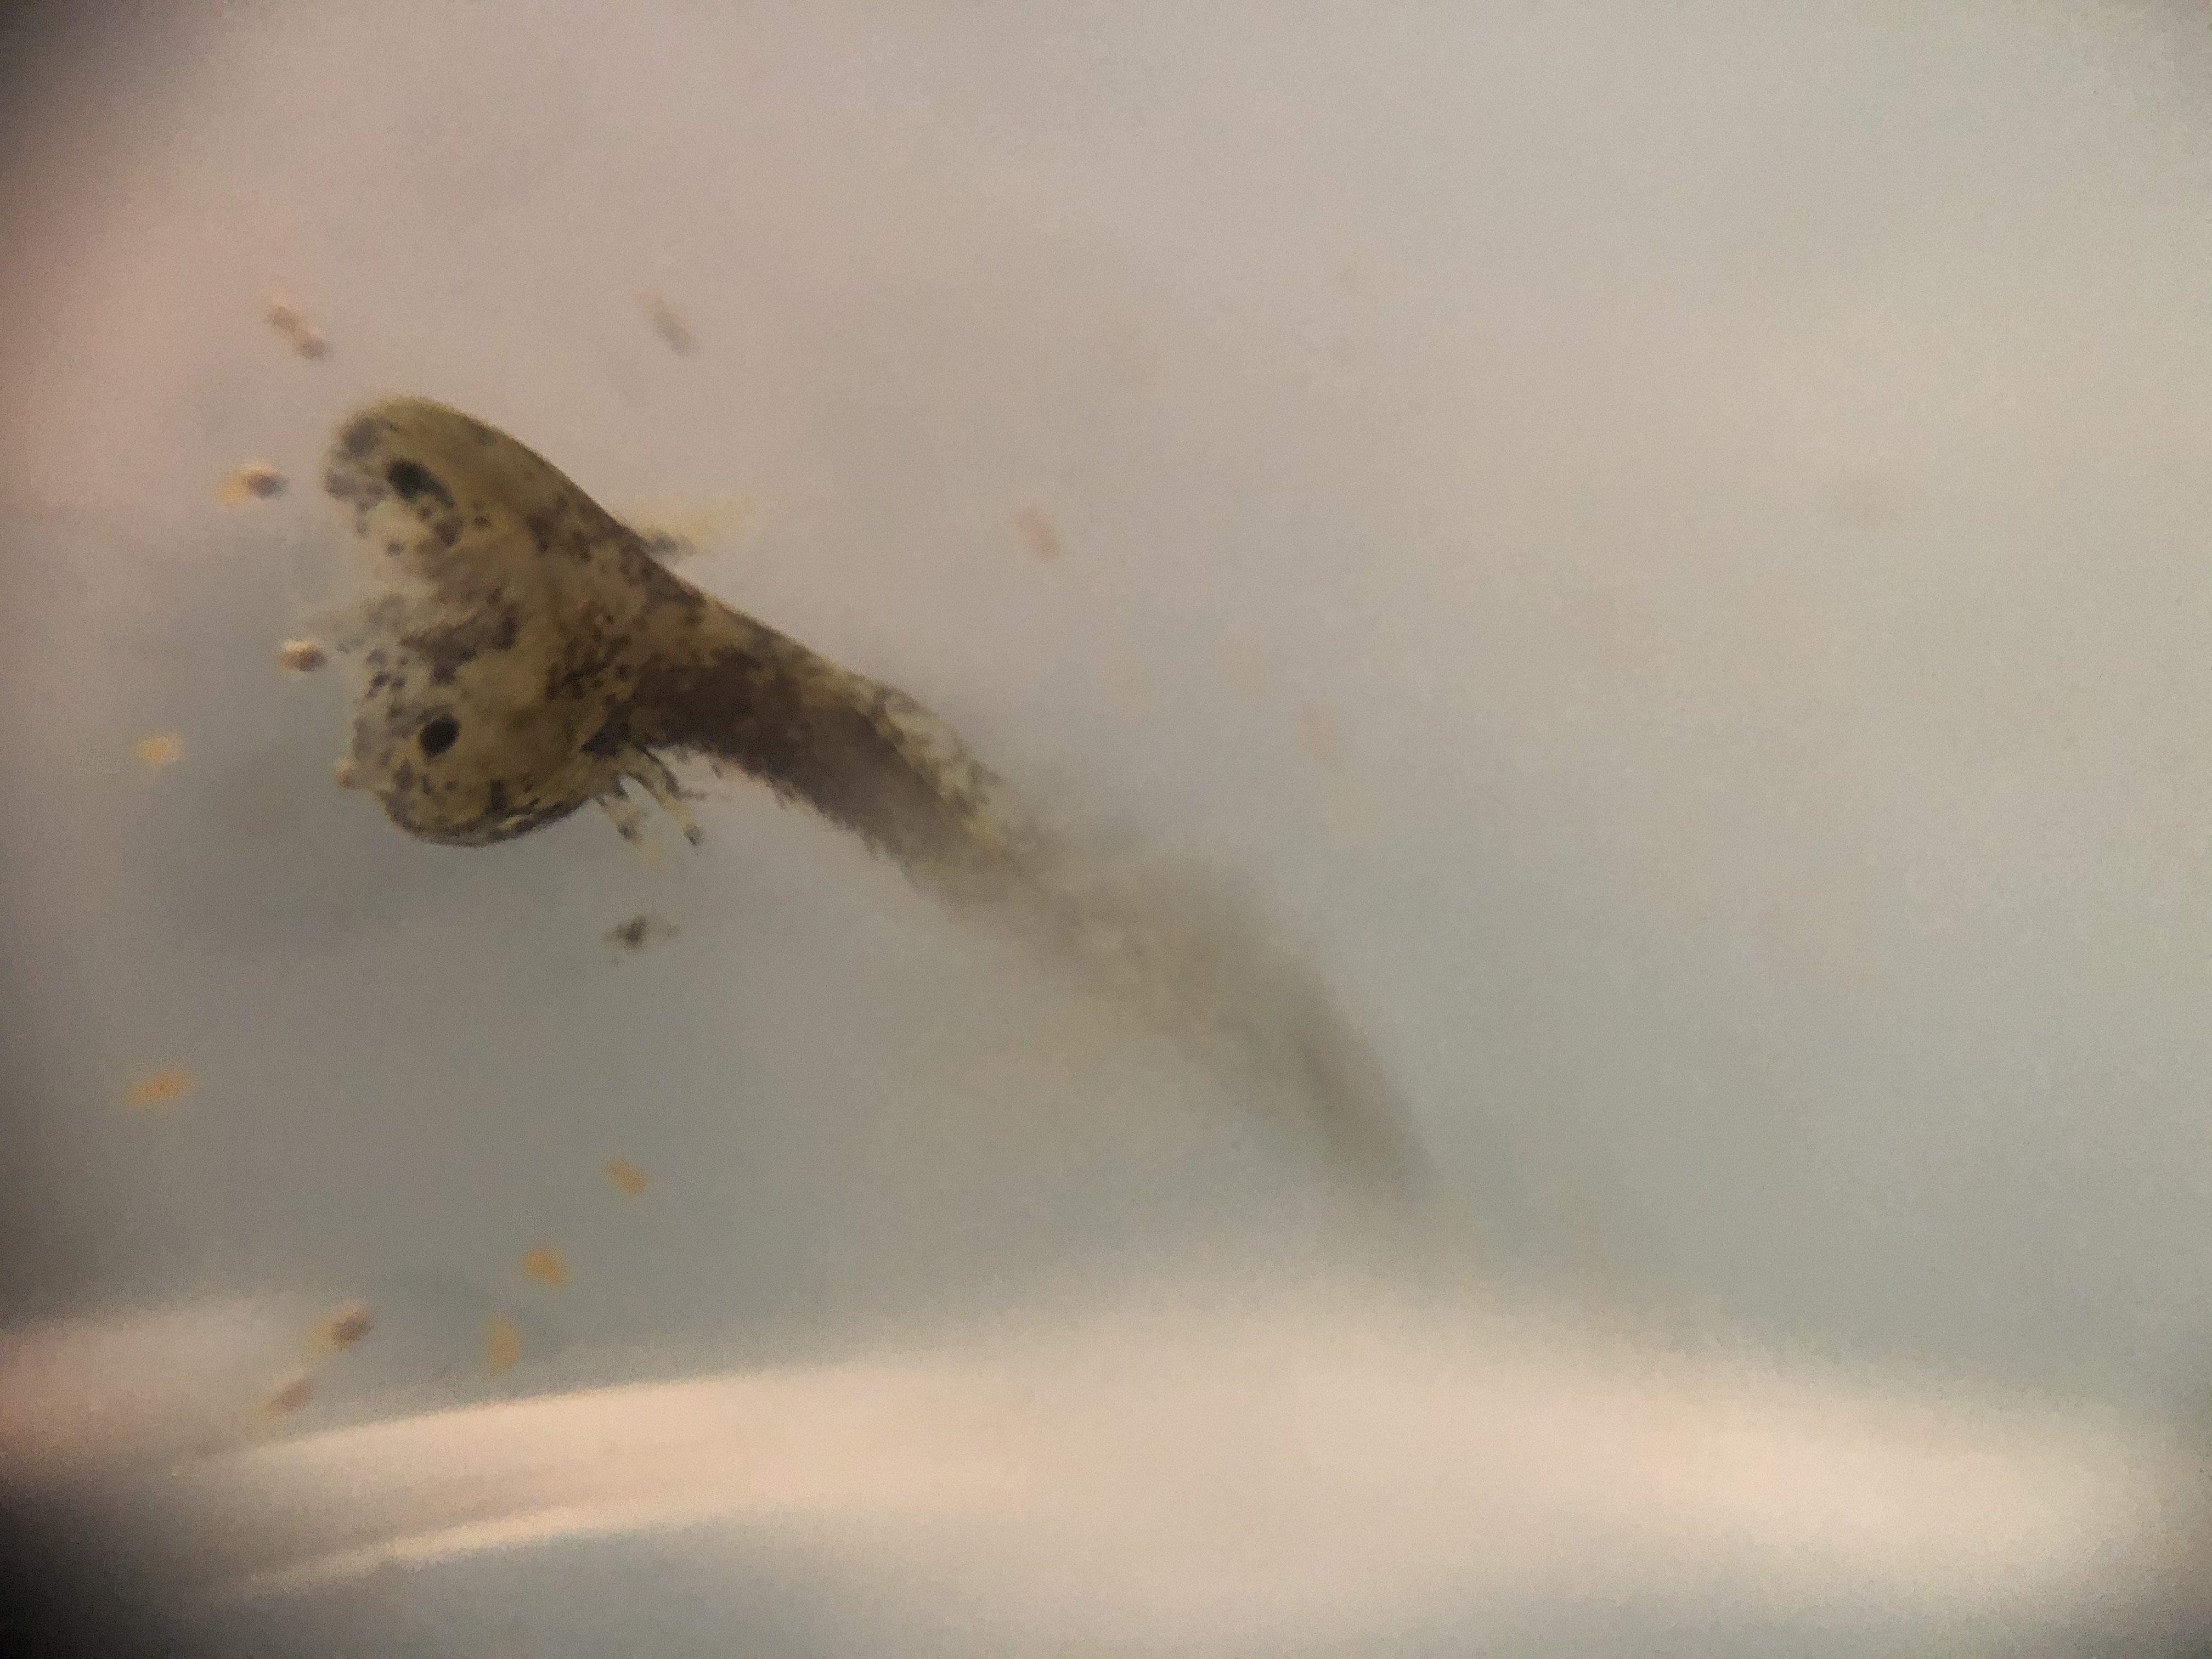 Waterlooville Mum Shocked After Pet Axolotls Give Birth To A Rare Baby With Two Heads The News